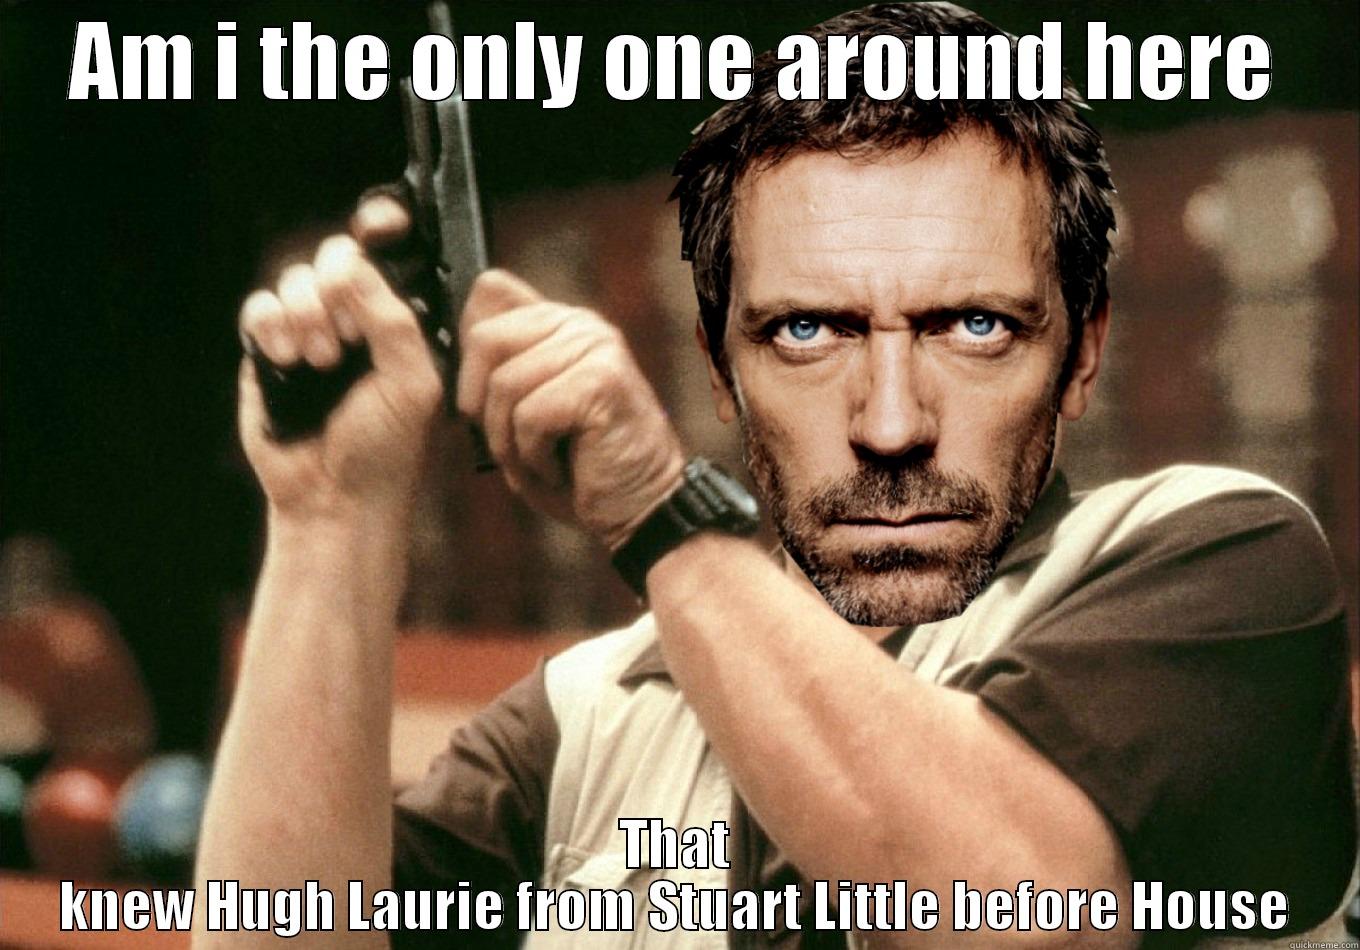 Dr house - AM I THE ONLY ONE AROUND HERE THAT KNEW HUGH LAURIE FROM STUART LITTLE BEFORE HOUSE Misc